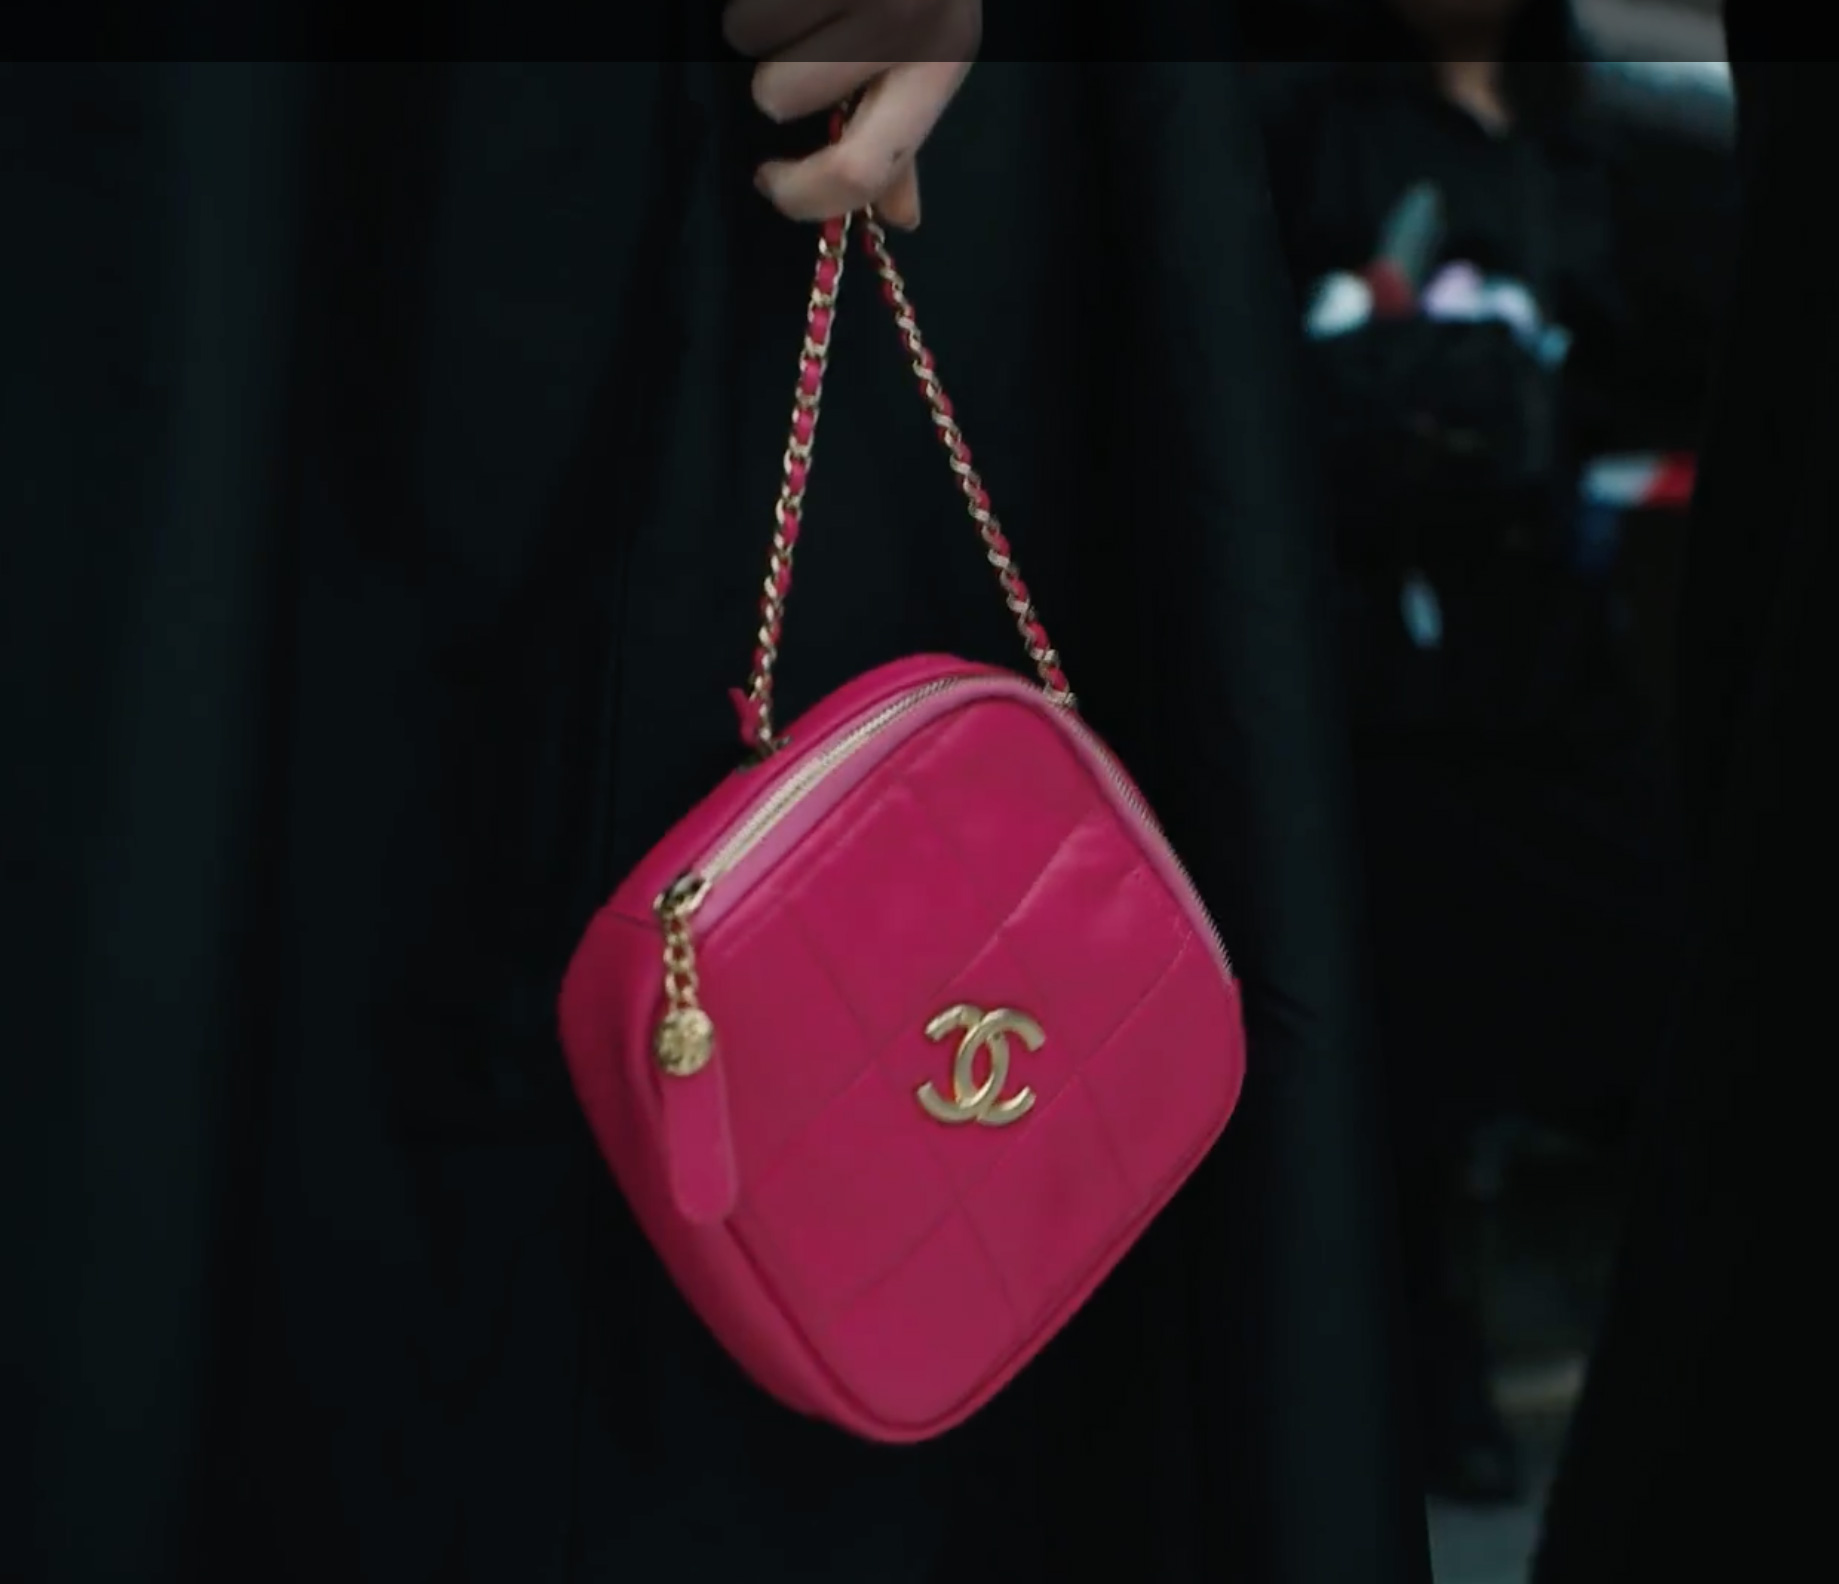 Chanel takes on the New Face of Pink this Fall-Winter 2020